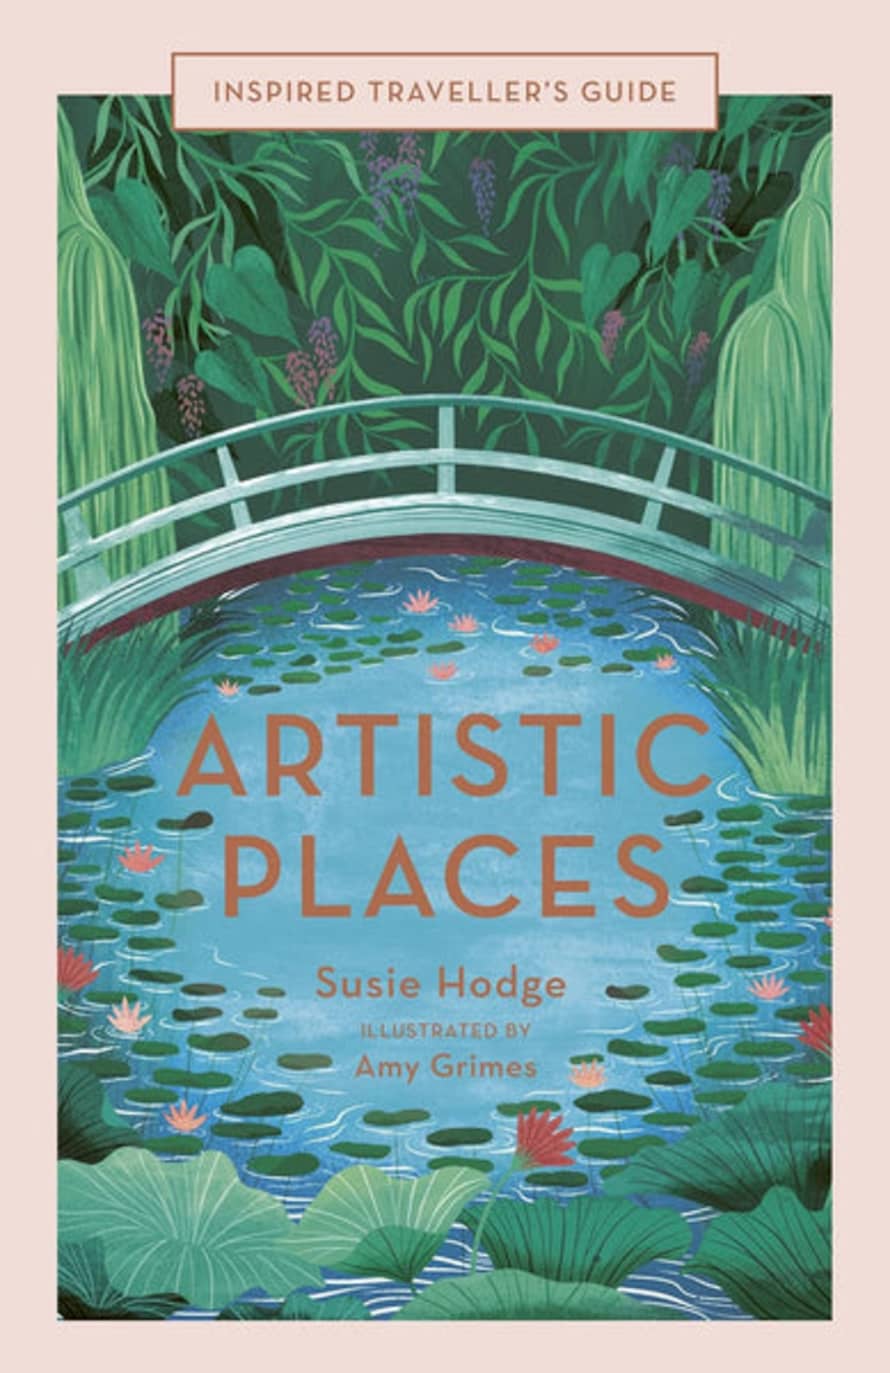 Books Inspired Traveller's Guide: Artistic Places